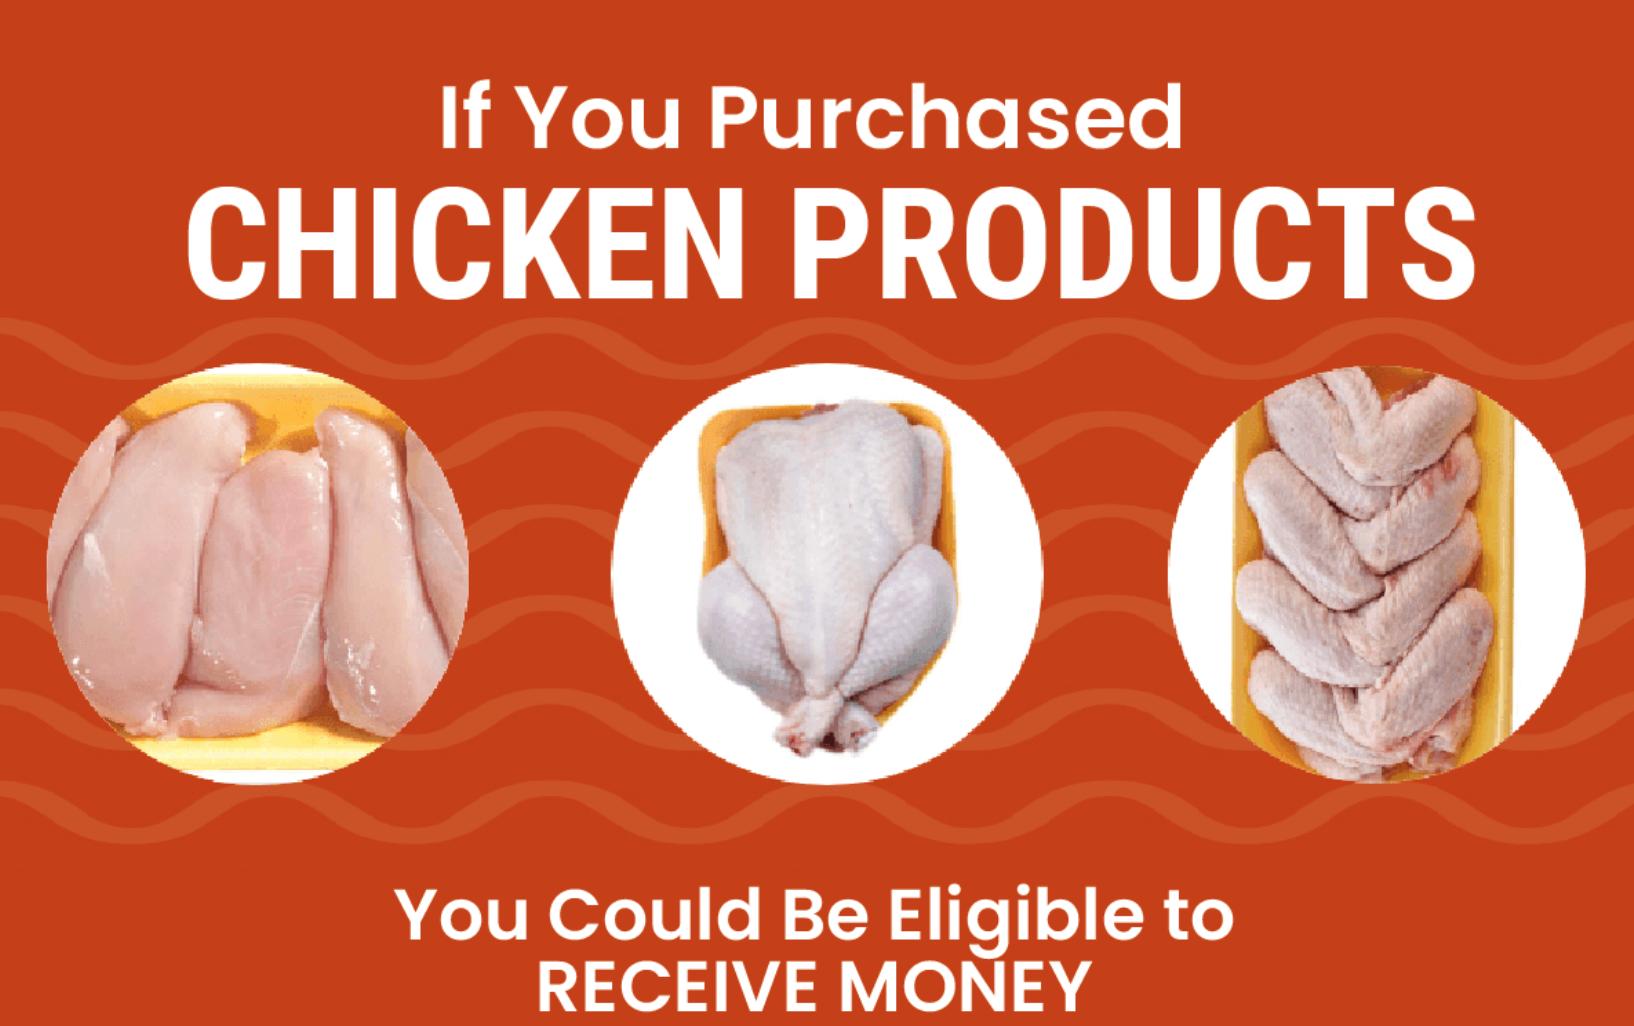 Chicken Products Class Action Settlement for Anyone Who Has Bought Chicken